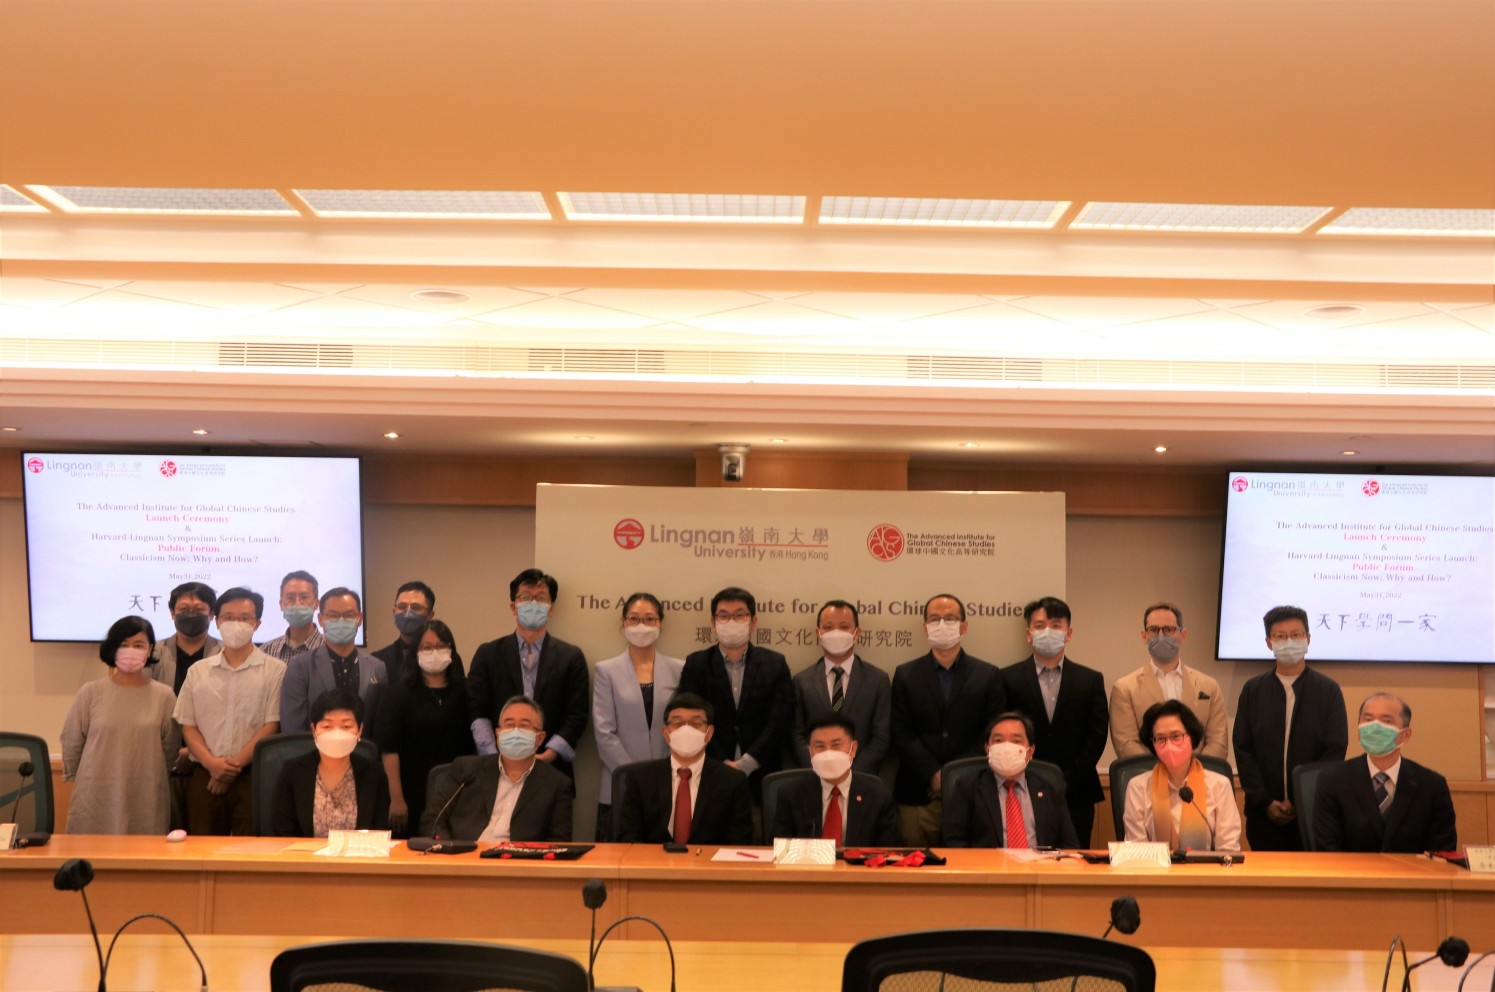 Lingnan University launches Advanced Institute for Global Chinese Studies to foster in-depth scholarly exchanges among institutions and scholars throughout the world in various fields in Chinese studies.